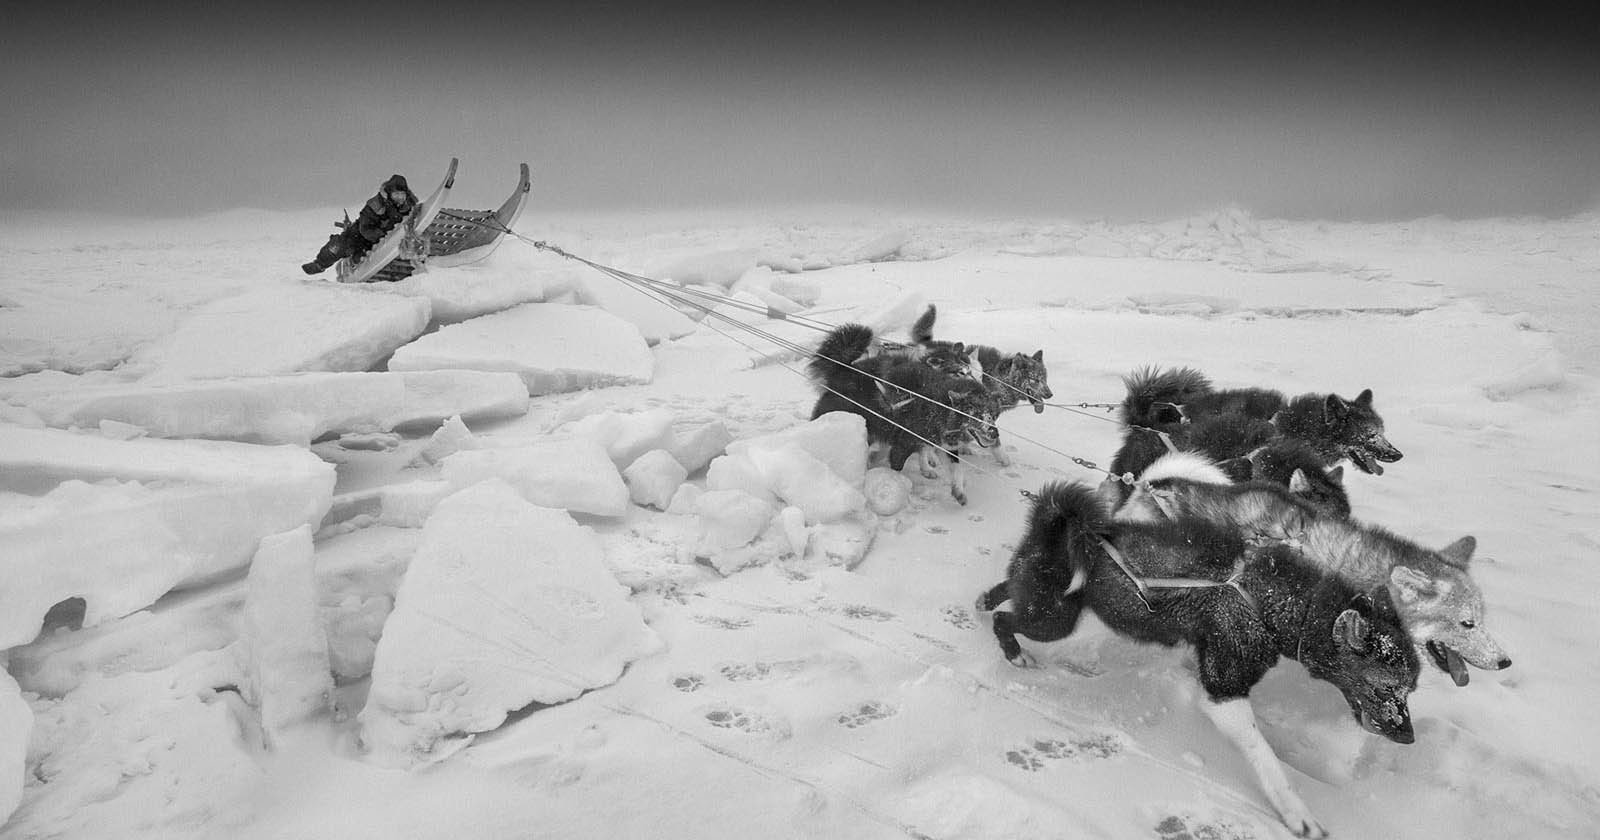 Stark Black and White Photos Capture Life in a Melting Arctic